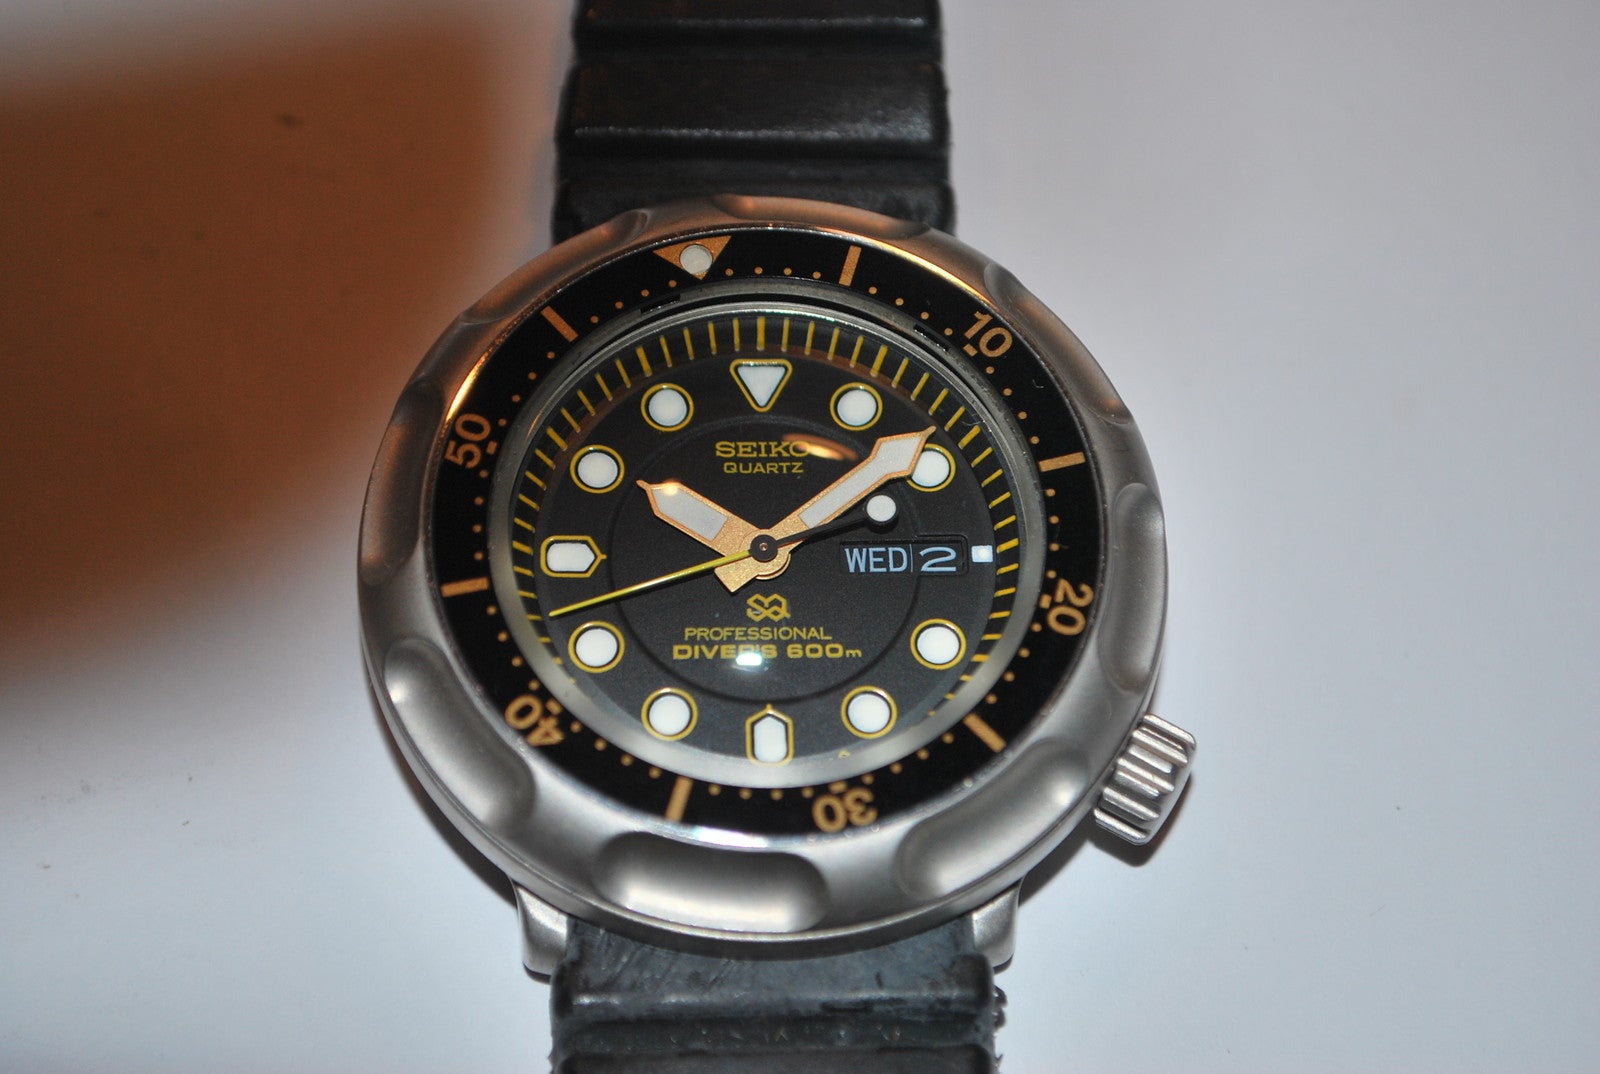 Seiko 7c46 6009 “Ashtray” – sample. Can we rebuild it? | The Watch Site